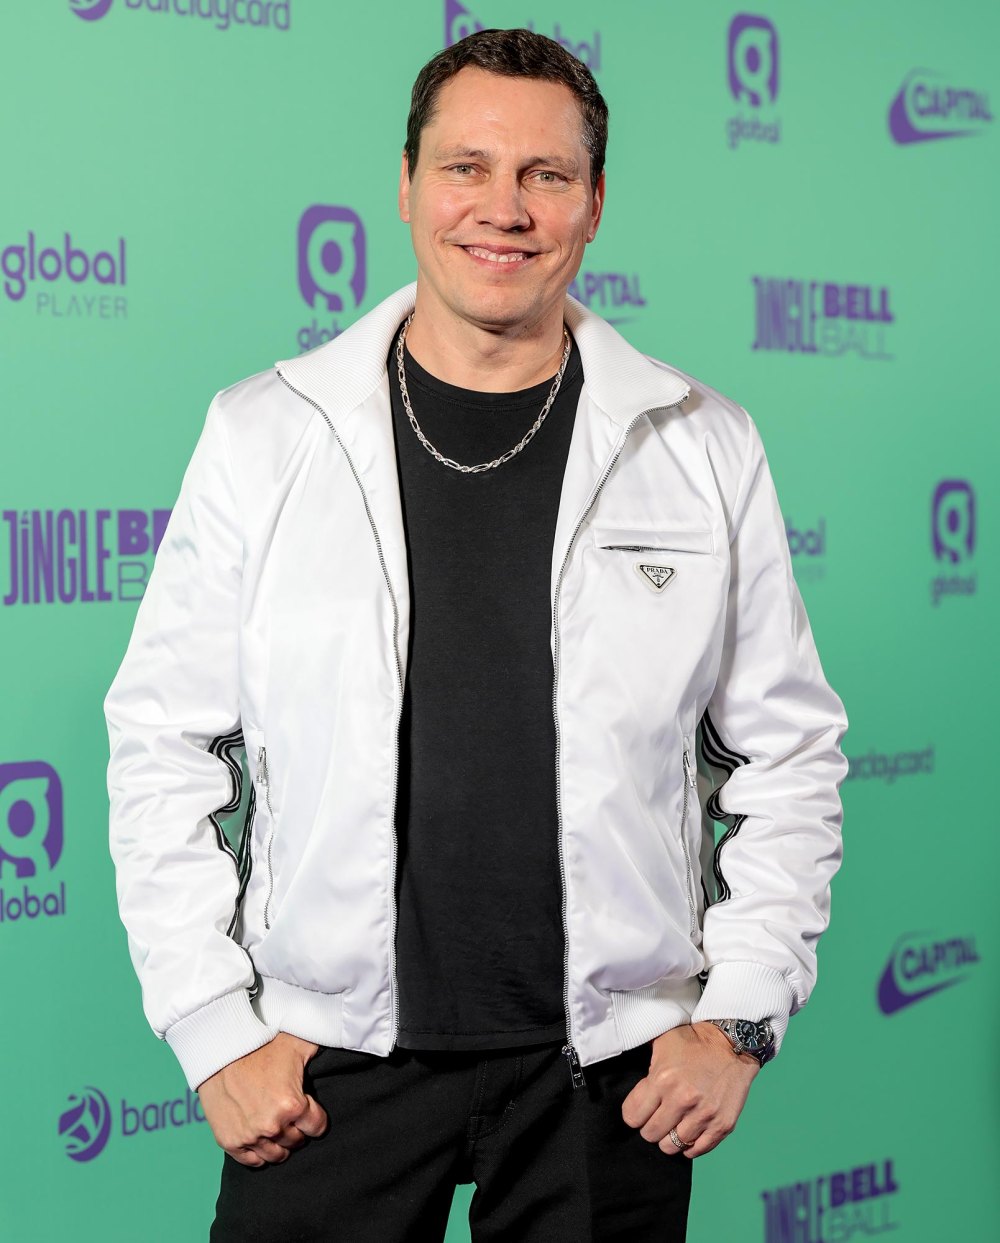 DJ Tiesto Pulls Out of Super Bowl LVIII Performance Due to Family Emergency